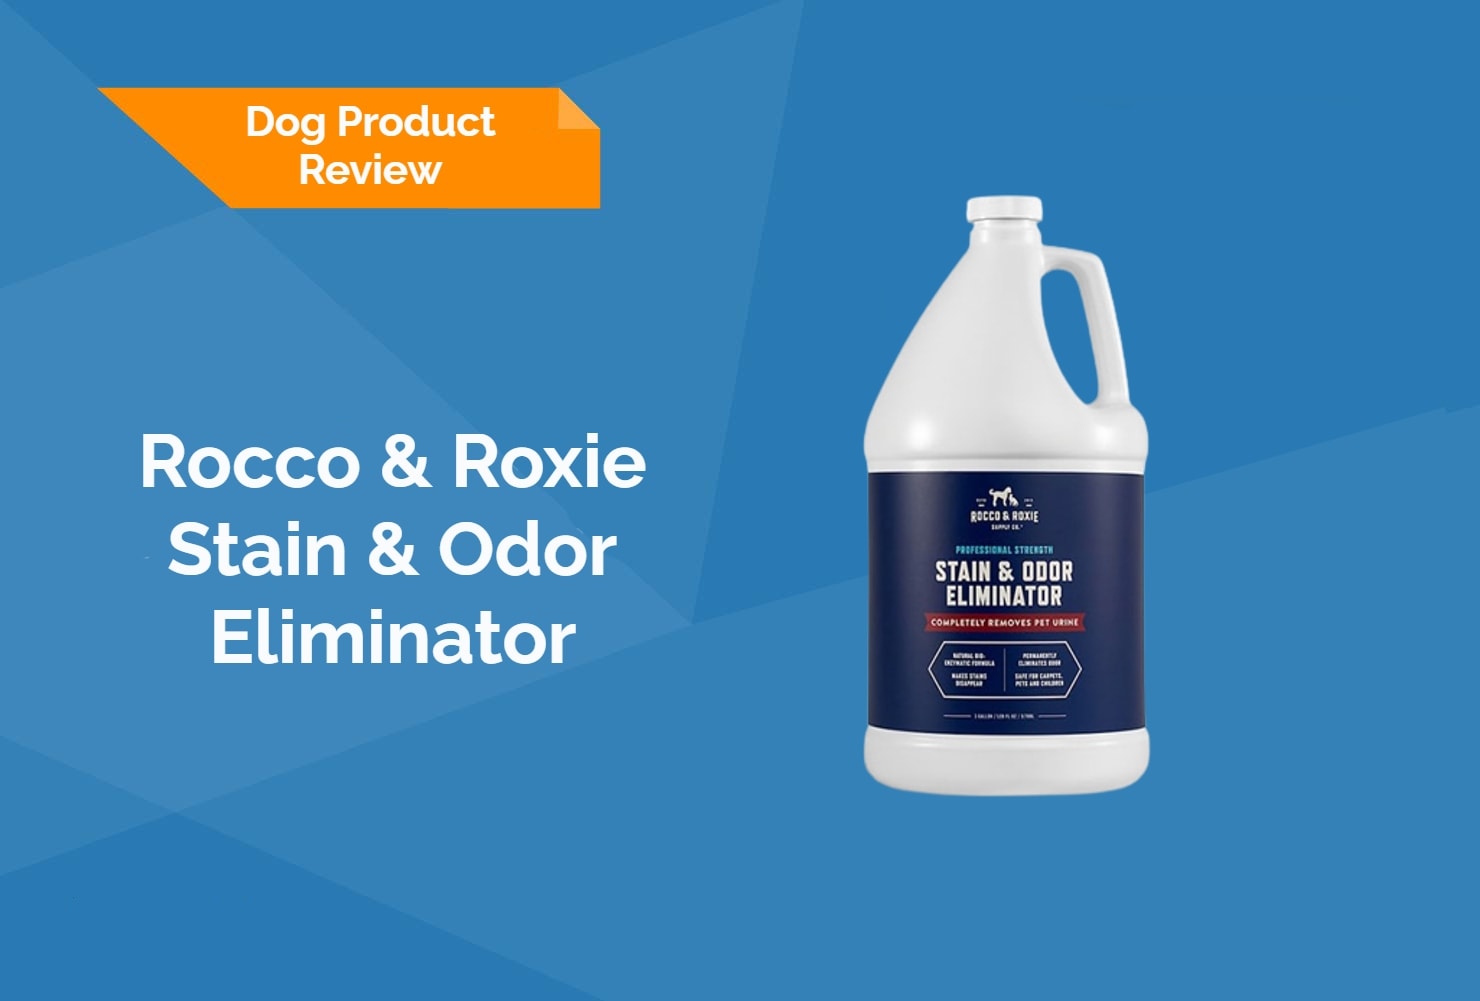 Rocco & Roxie Stain & Odor Eliminator Review